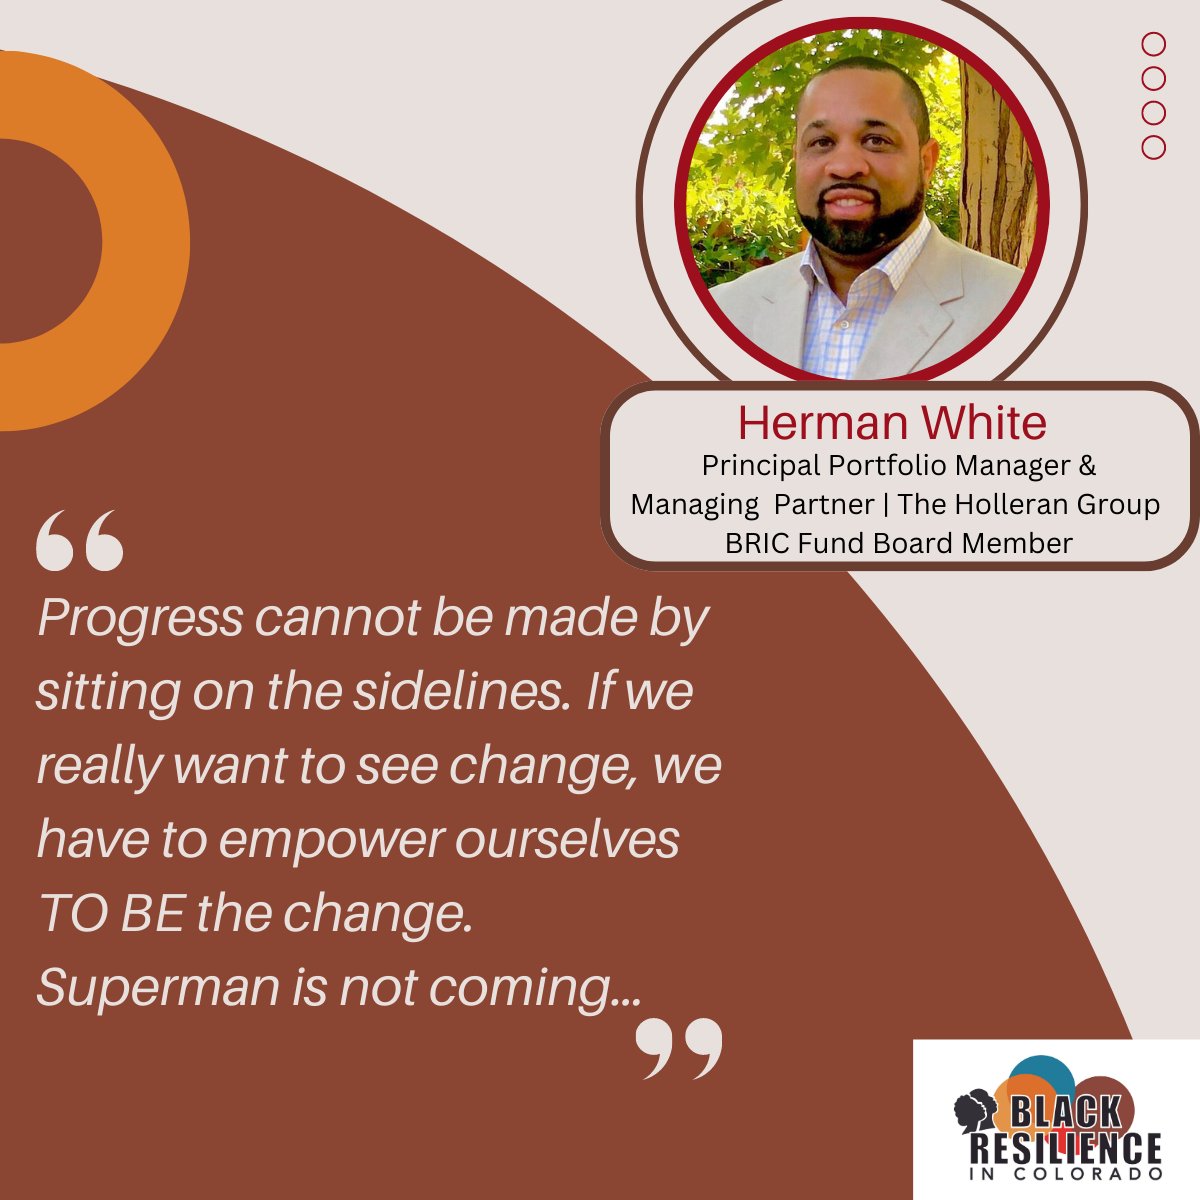 #WednesdayWisdom
'Progress cannot be made by sitting on the sidelines. Superman is not coming...' – Herman White, Principal Portfolio Manager &  Managing Partner-The Holleran Group | BRIC Fund Board Member
 
 #bricfundco #bricbybric #wordsofwisdom #givingblack #metrodenver